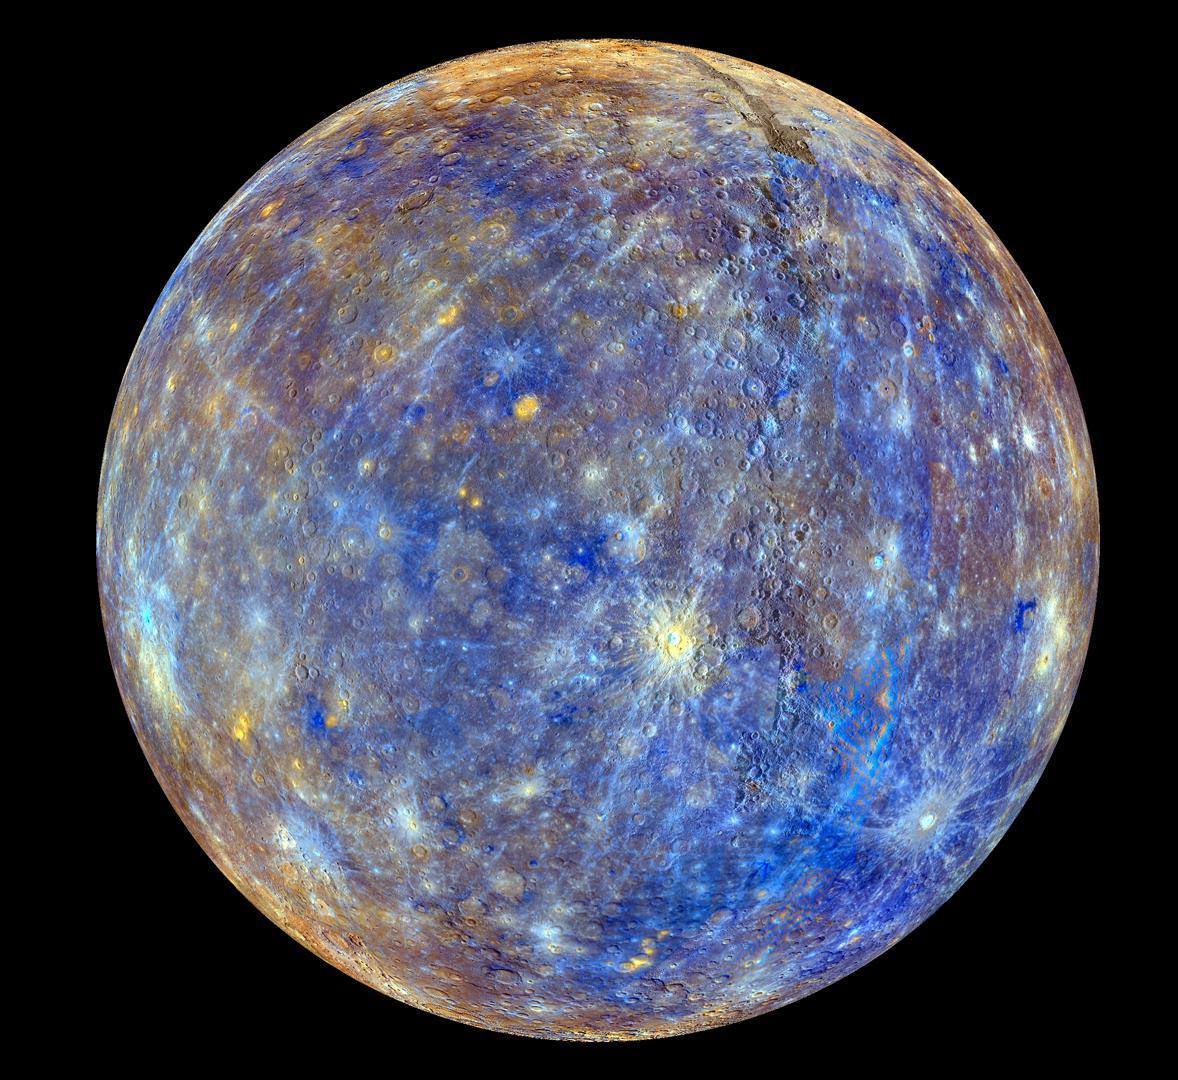   Apparently this is “The clearest photo of Mercury ever taken.”  why isnt everyone